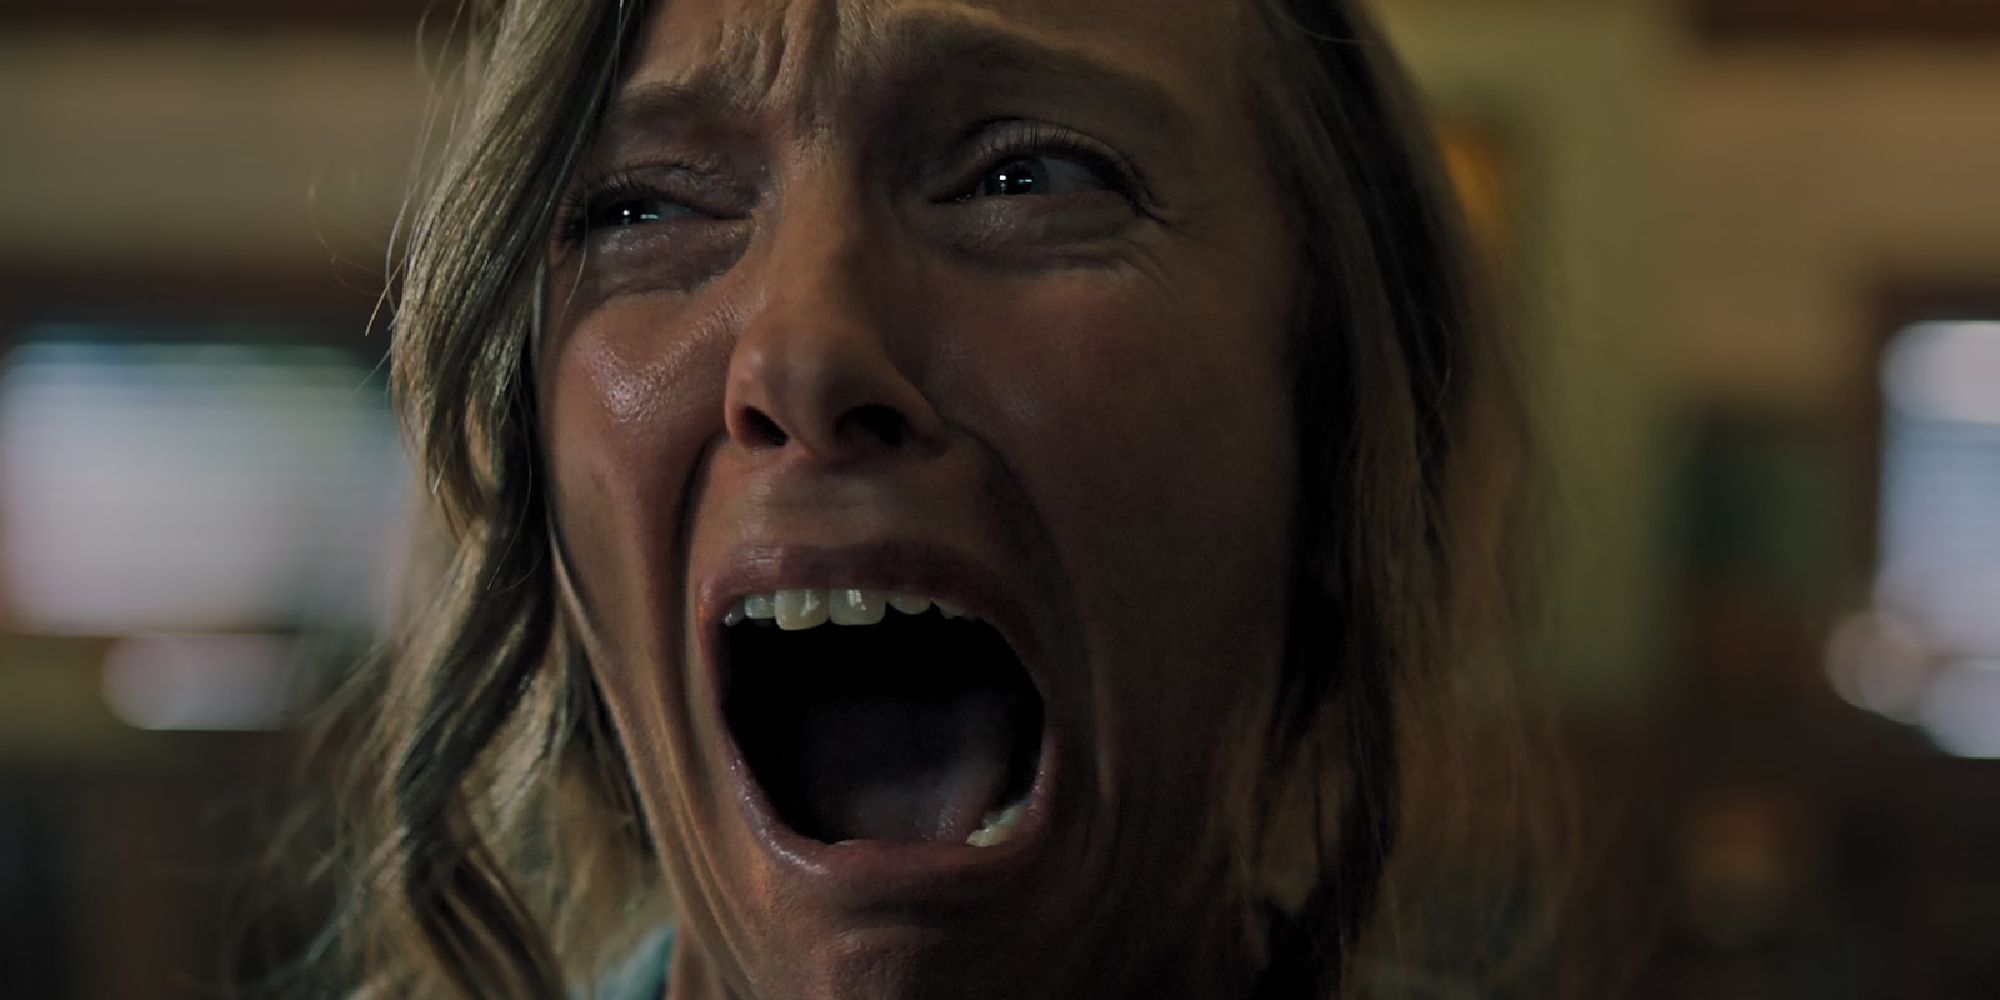 Toni Collette screaming in 'Hereditary'